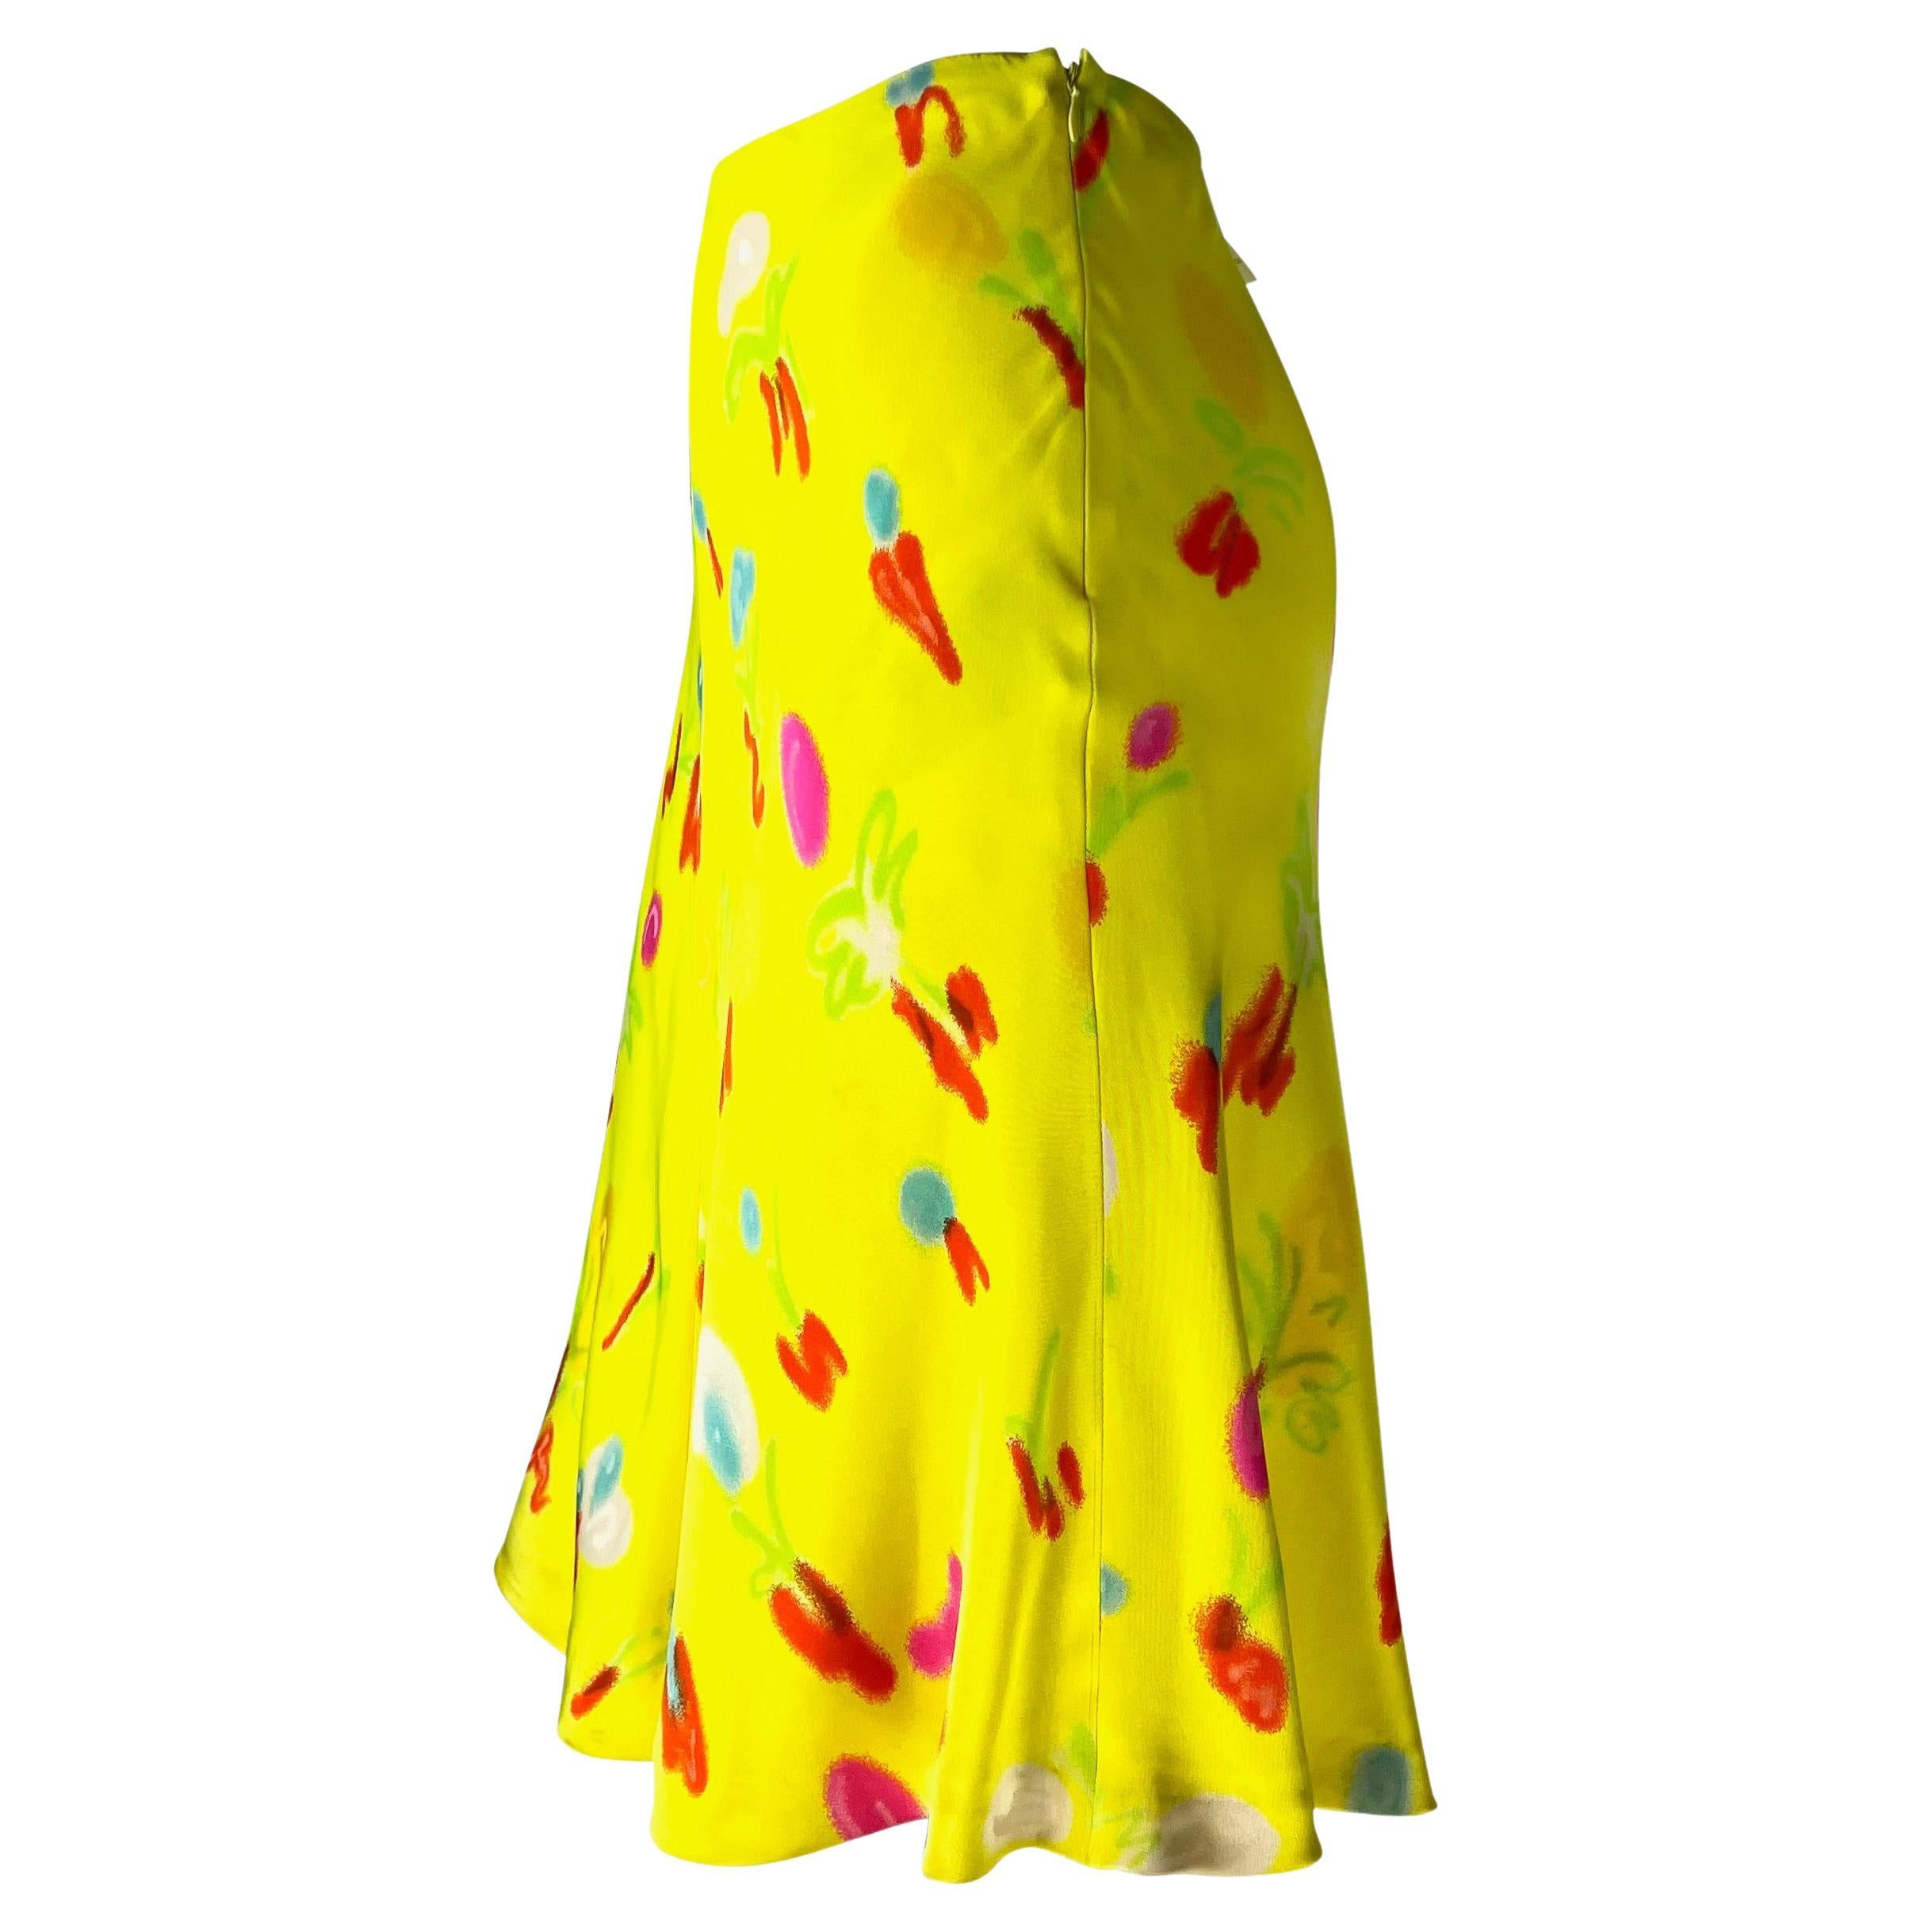 NWT S/S 1996 Gianni Versace Couture Neon Yellow Graffiti Floral Print Skirt In Good Condition For Sale In West Hollywood, CA